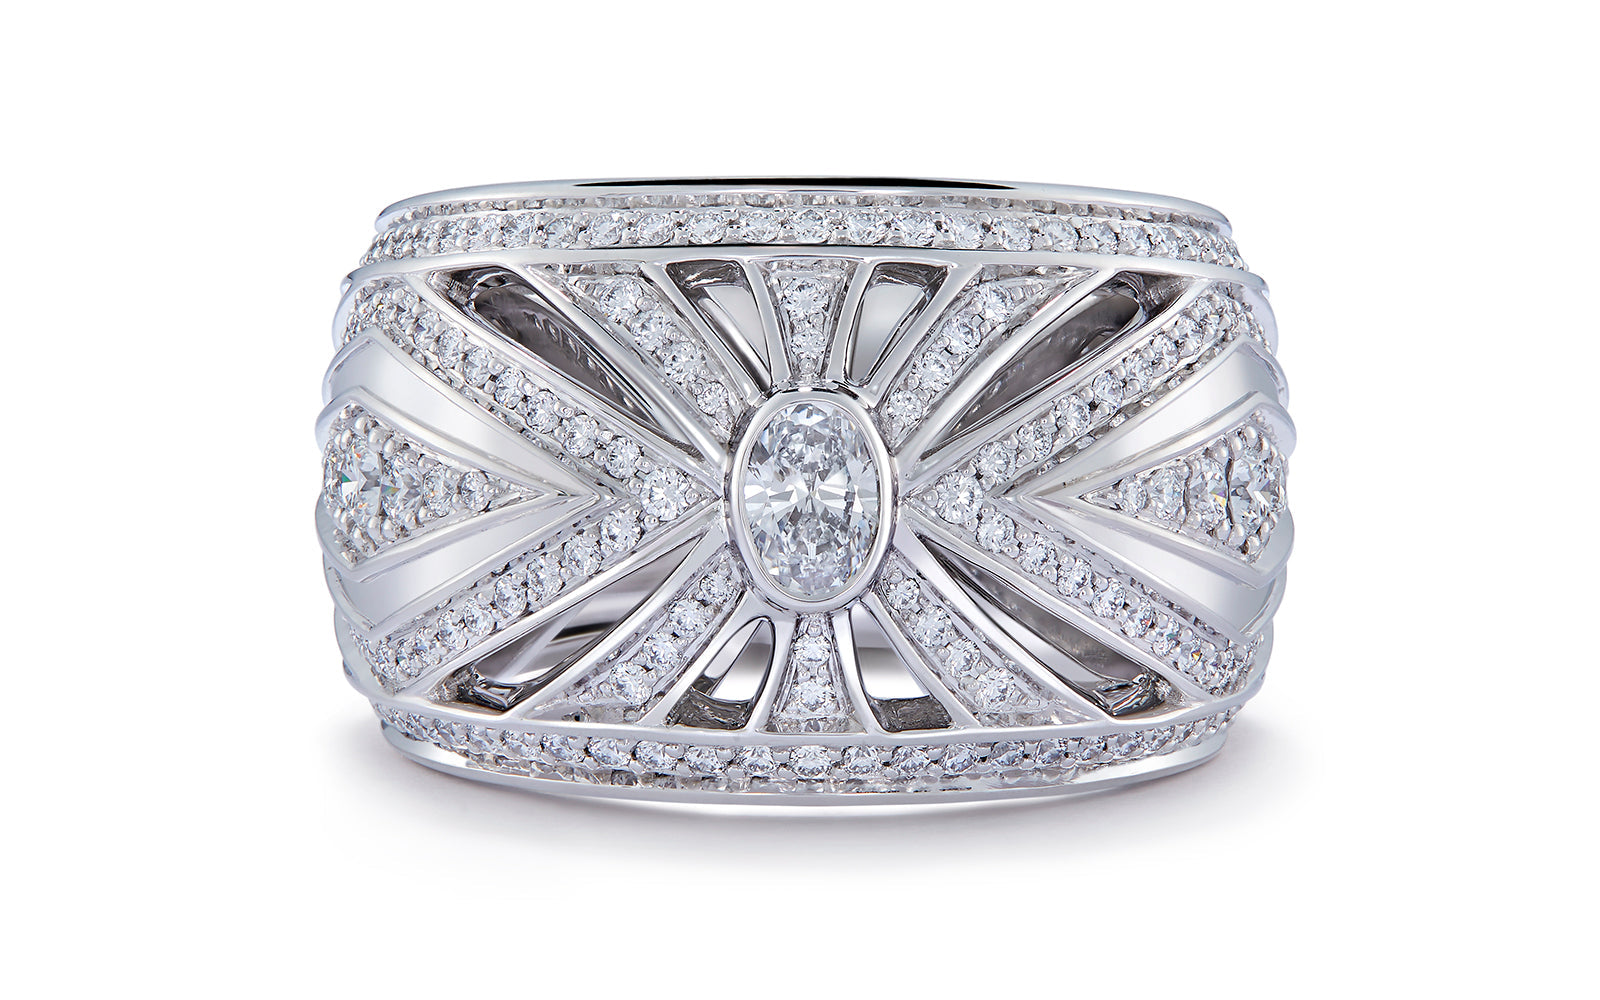 1.27ct D Flawless Diamonds Ring set in 18K White Gold